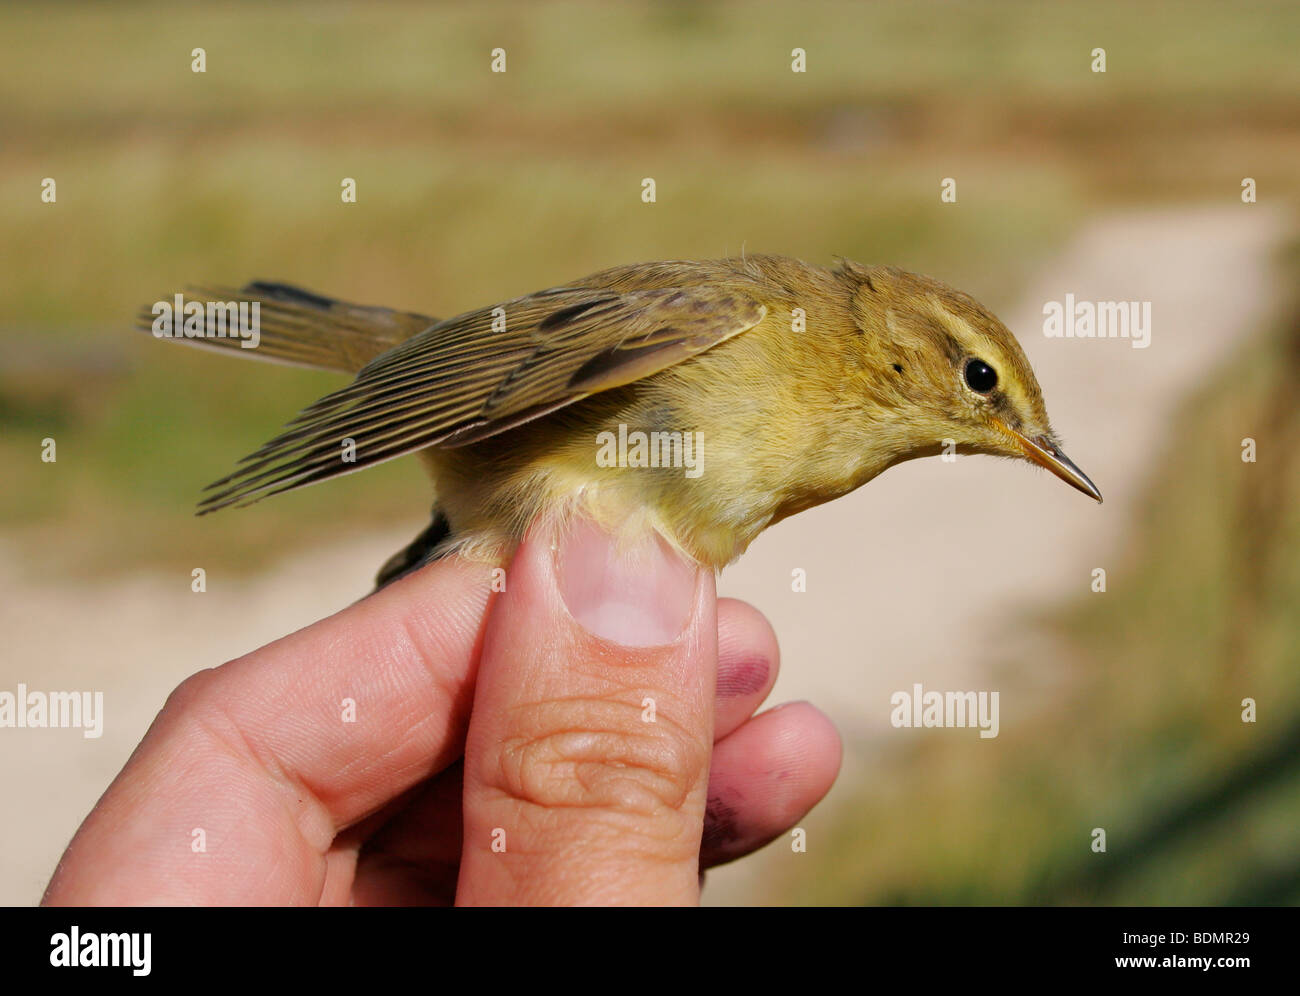 A juvenile Willow Warbler, Phylloscopus trochilus, being ringed by a professional ornithologist Stock Photo